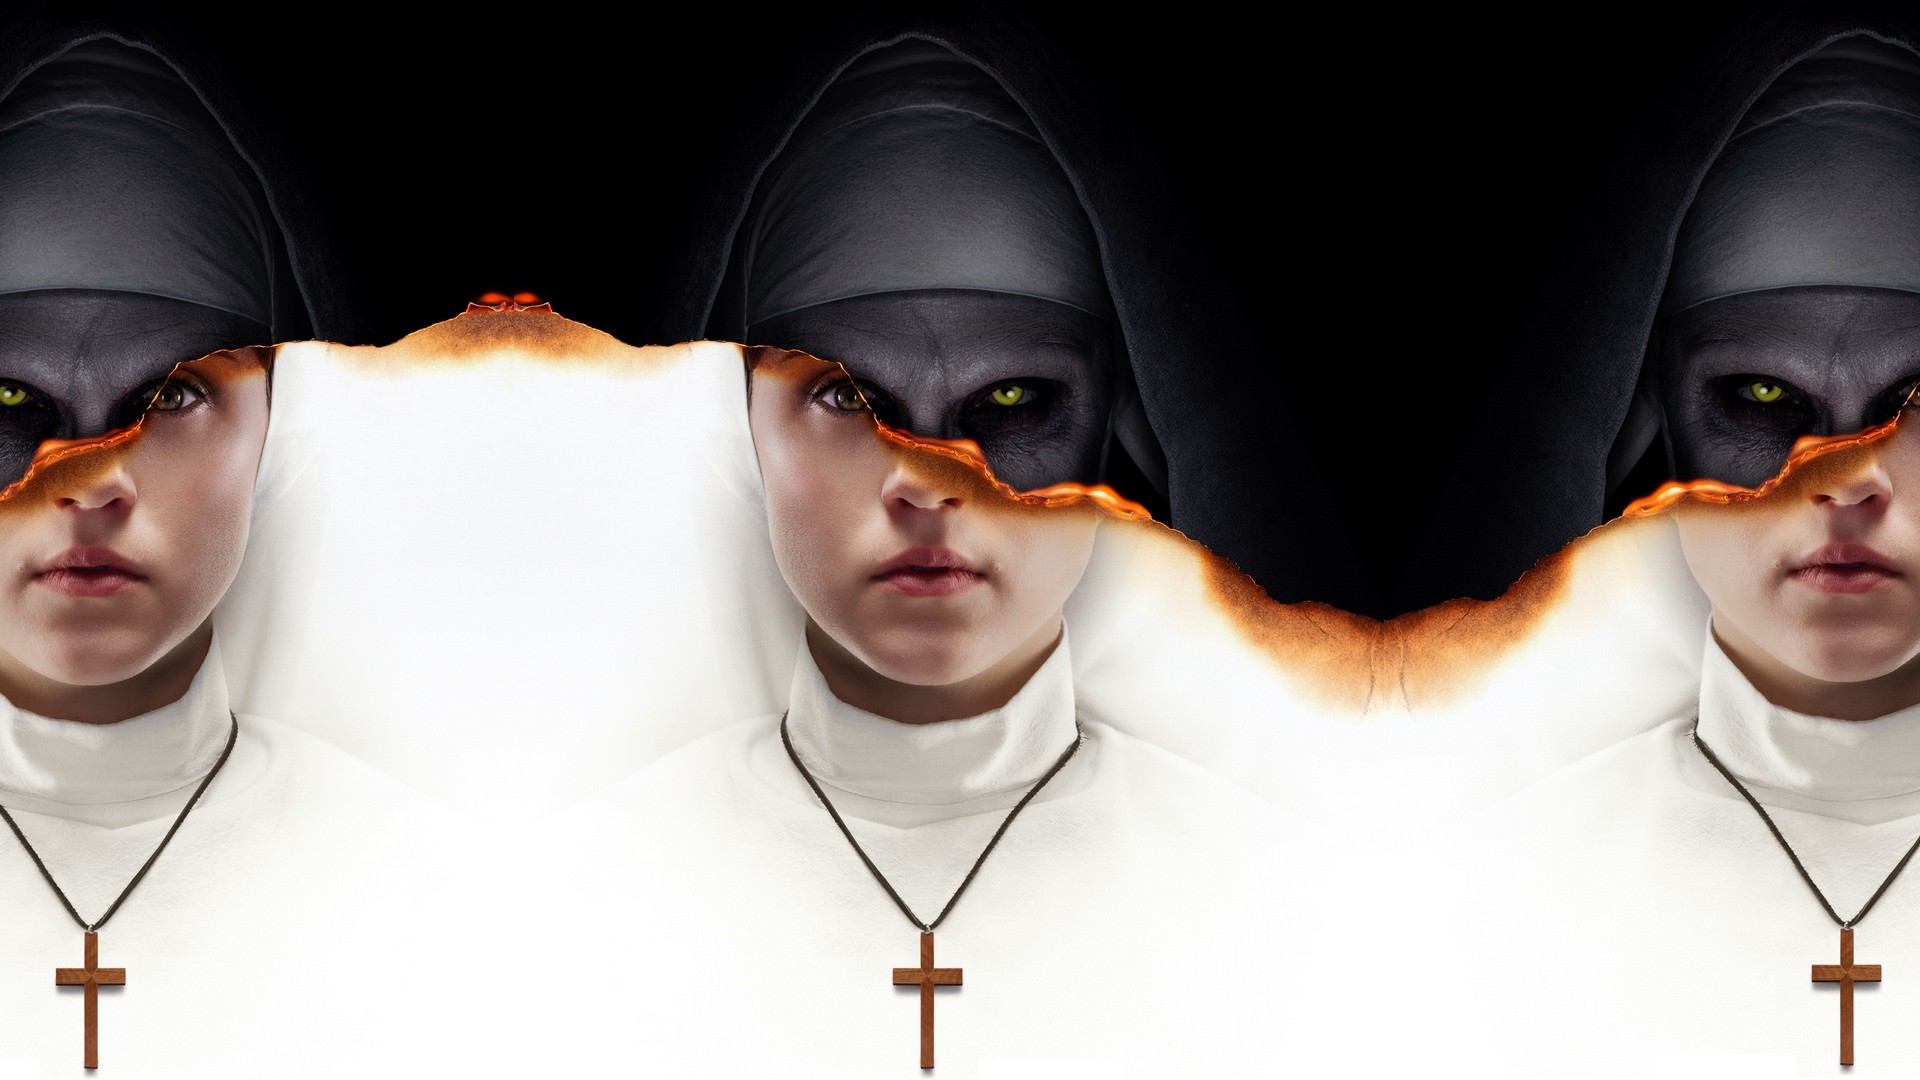 The Nun Poster Desktop Wallpaper with image resolution 1920x1080 pixel. You can use this wallpaper as background for your desktop Computer Screensavers, Android or iPhone smartphones